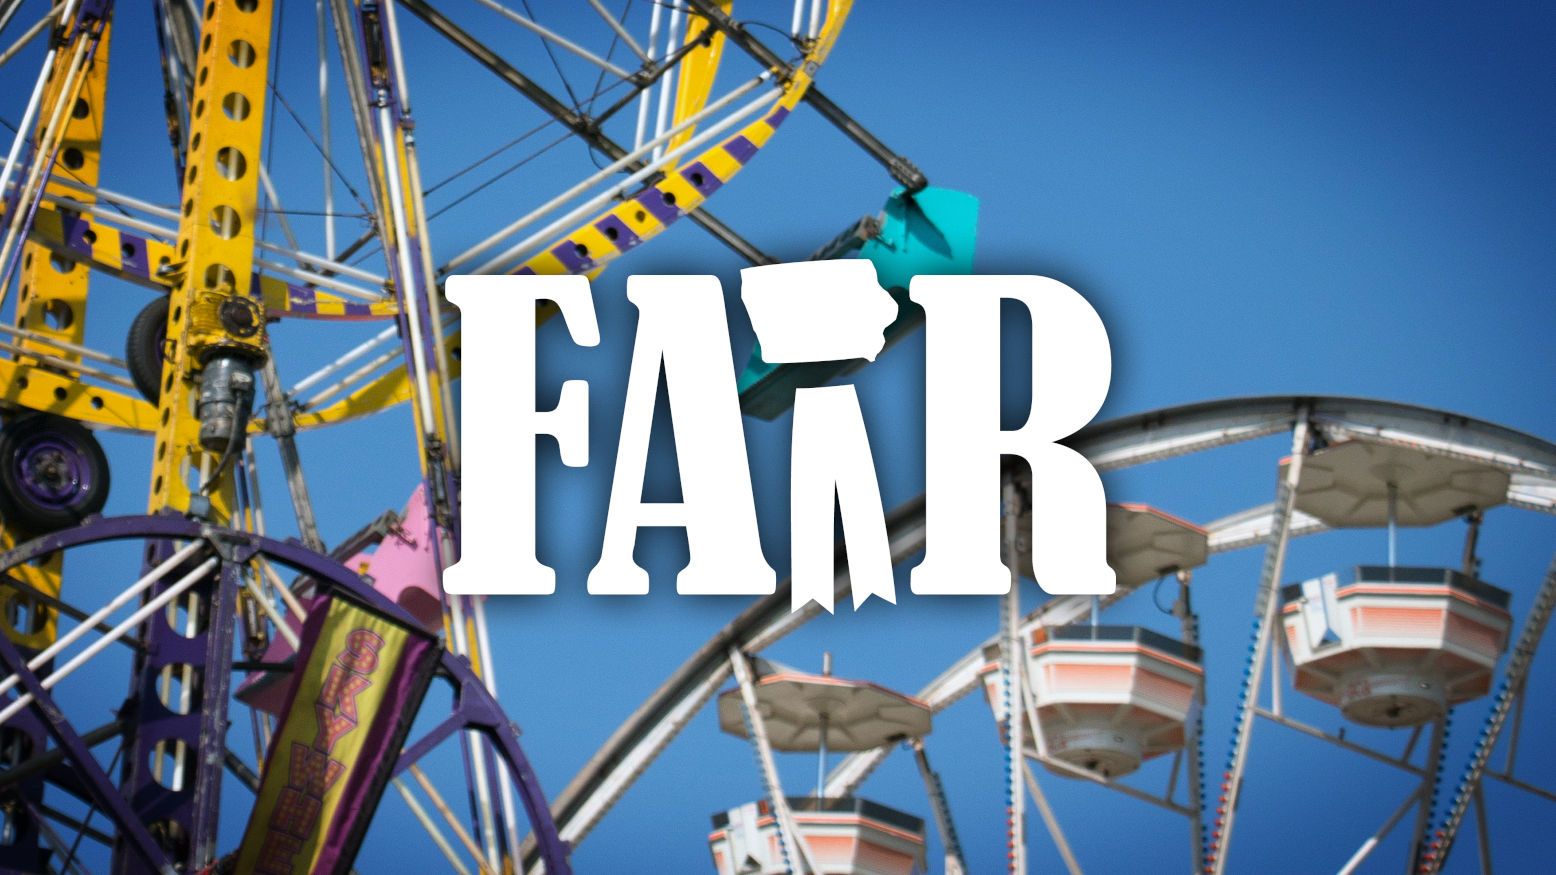 The word Fair with images of midway rides in the background